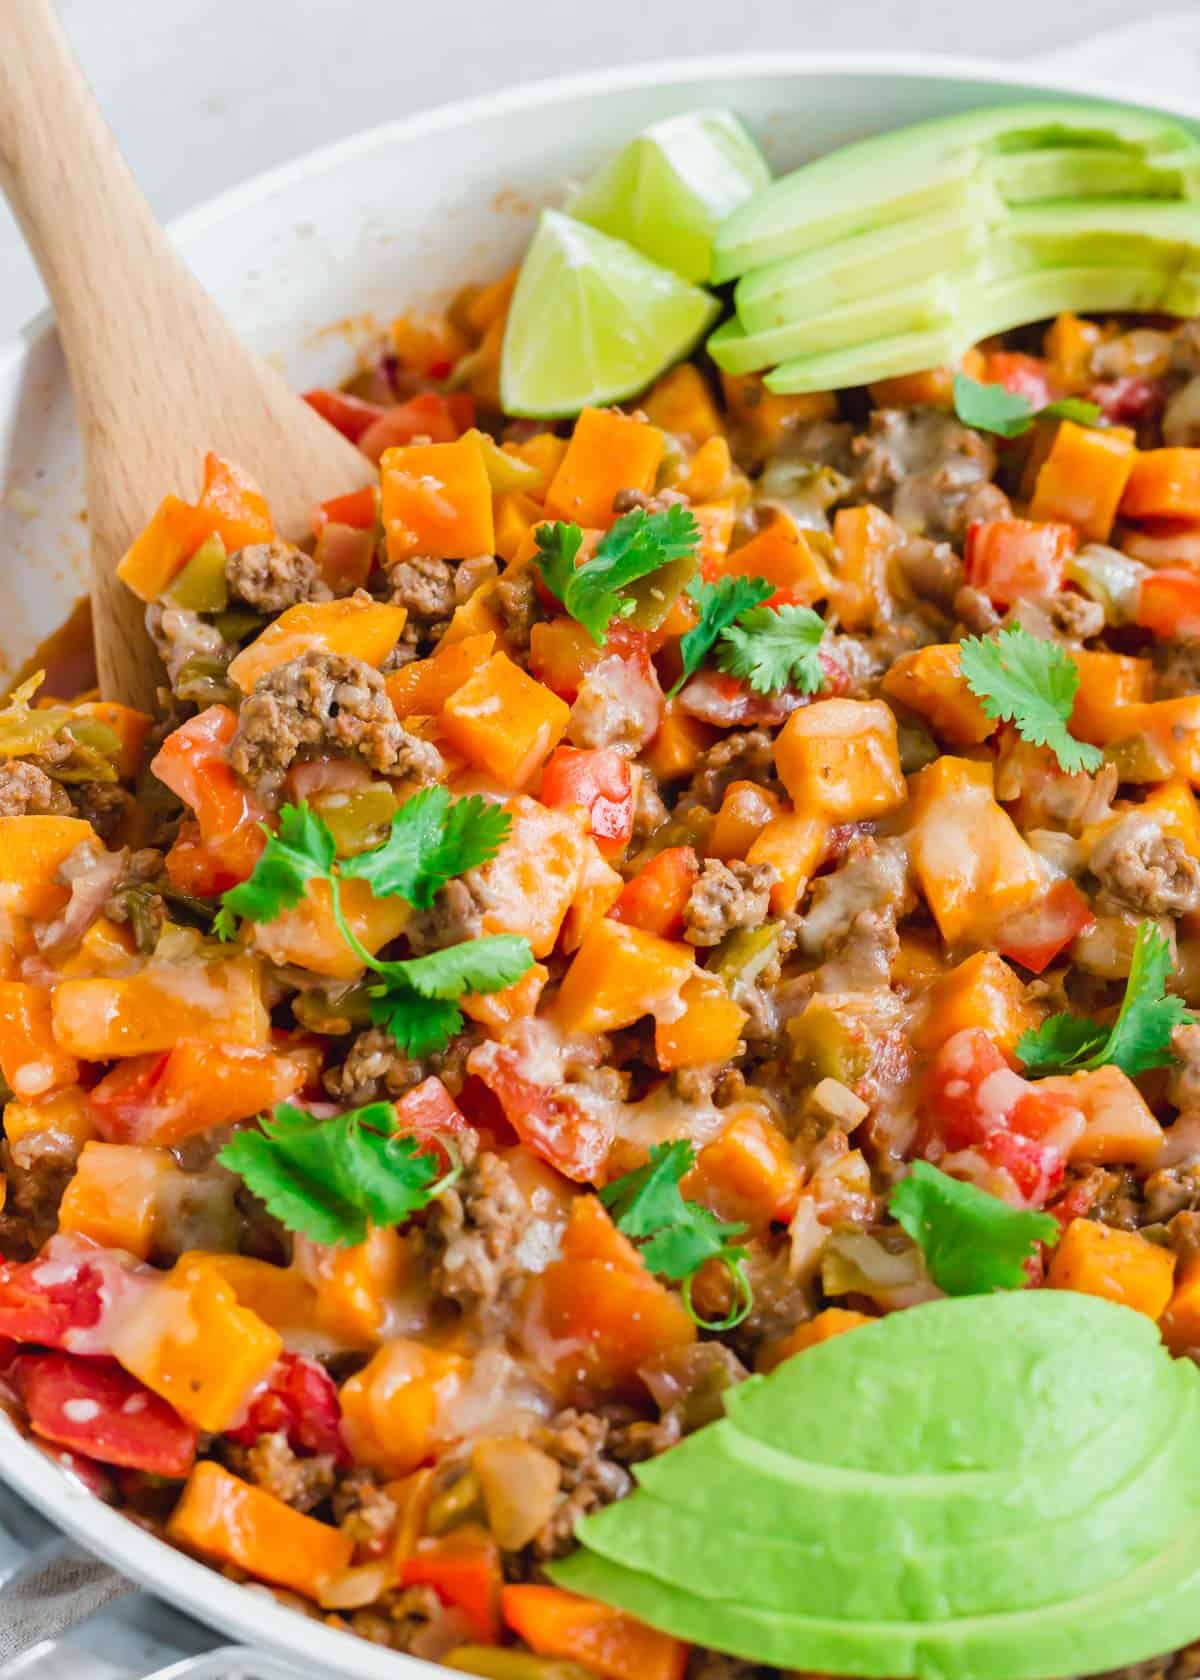 Southwest ground beef and sweet potato recipe in a white skillet with a wooden spatula.